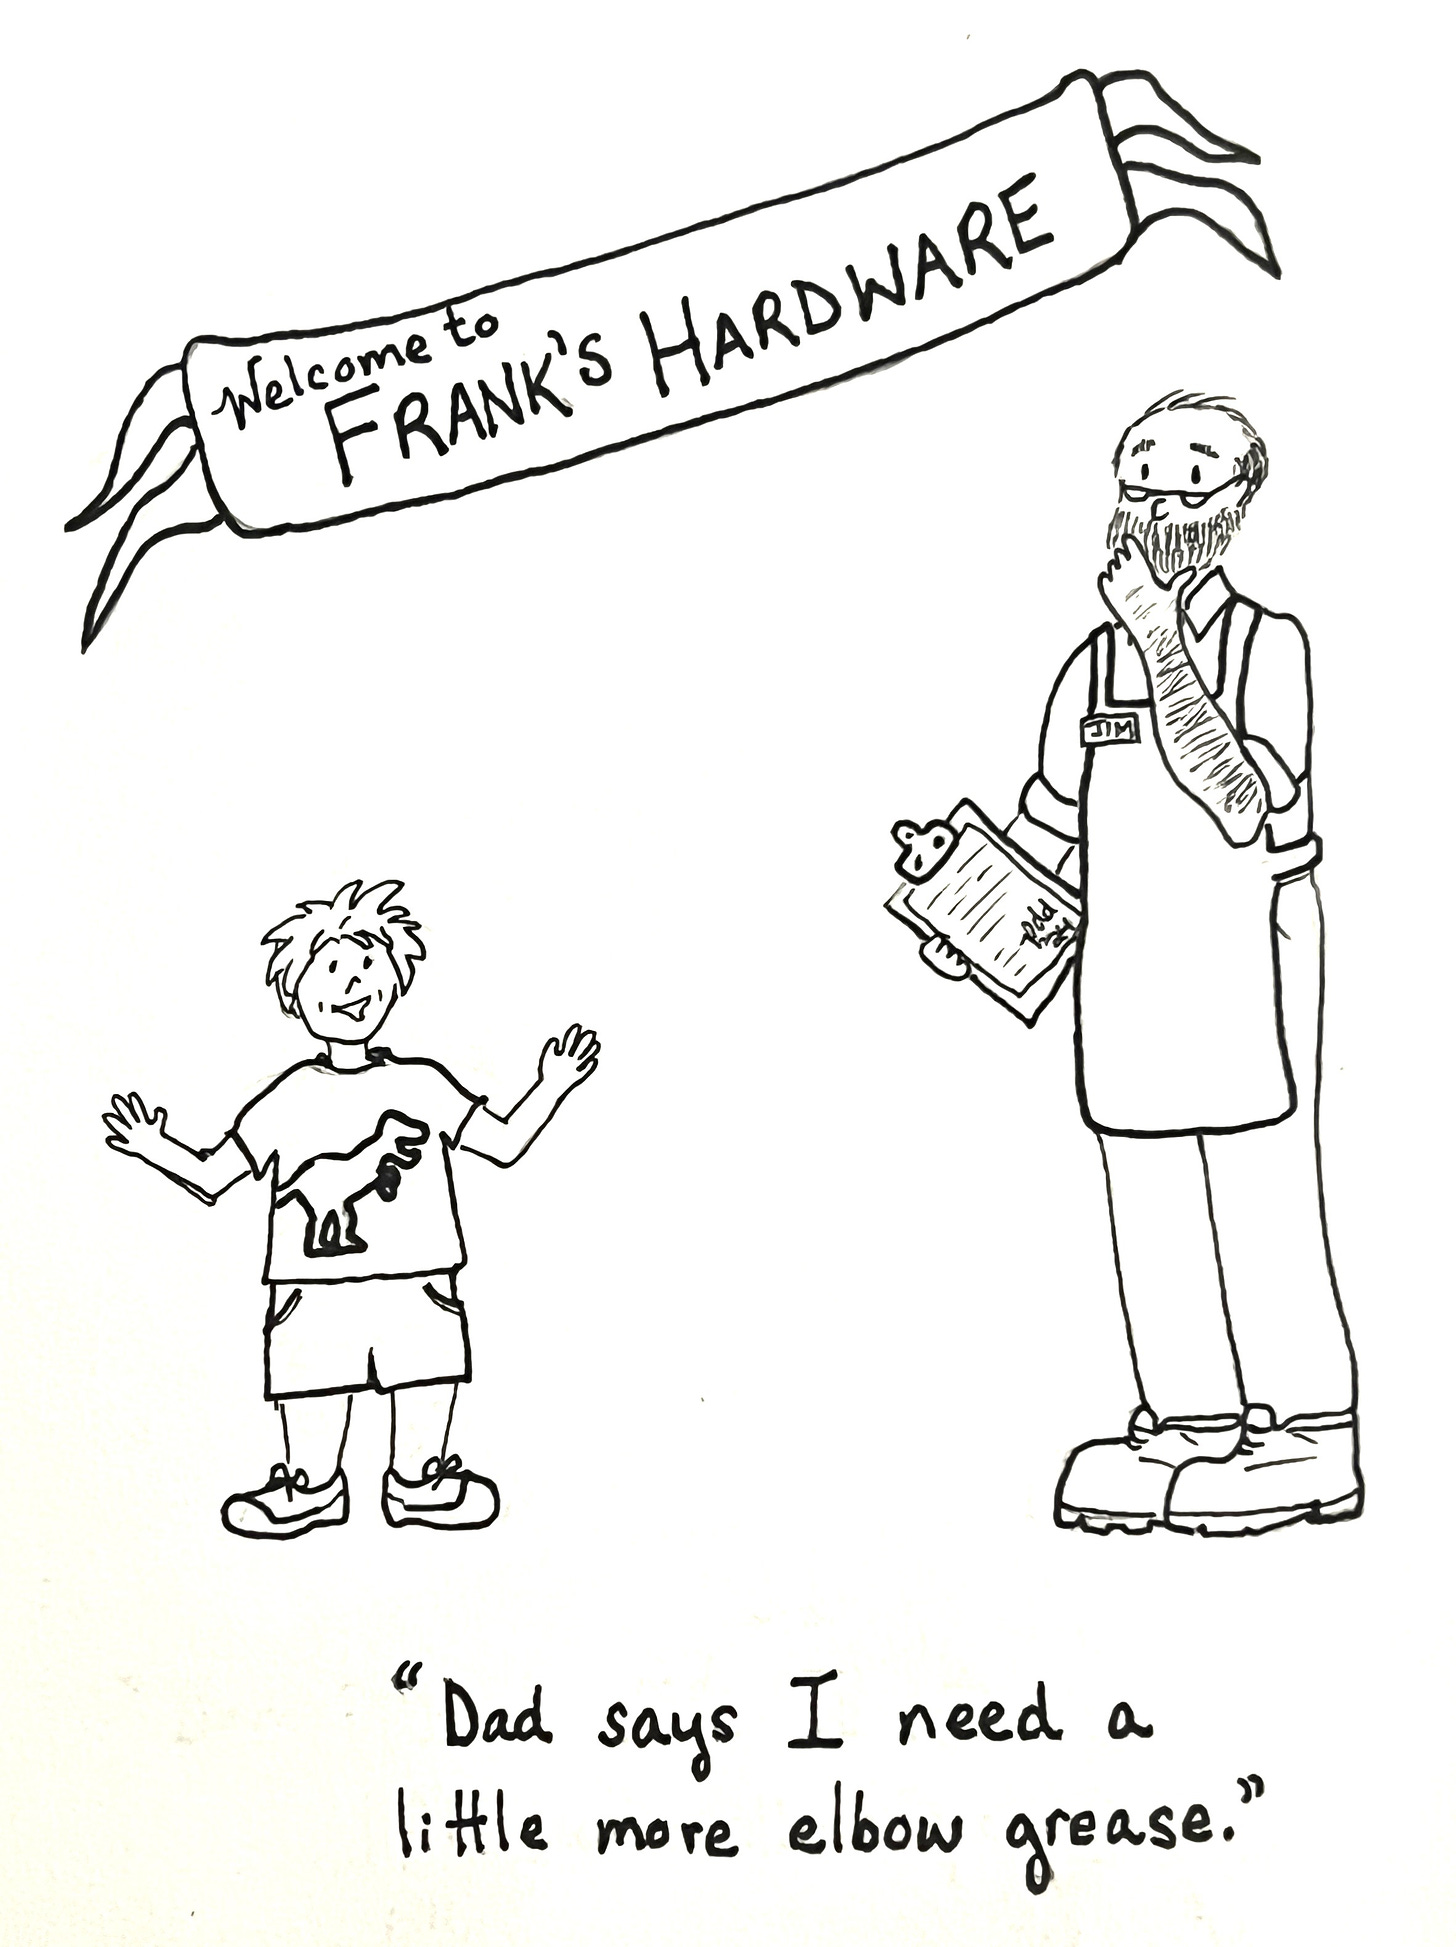 Hand-drawn cartoon by Patty Davidson: A young boy saying to older man at hardware store: "Dad says I need a little more elbow grease."